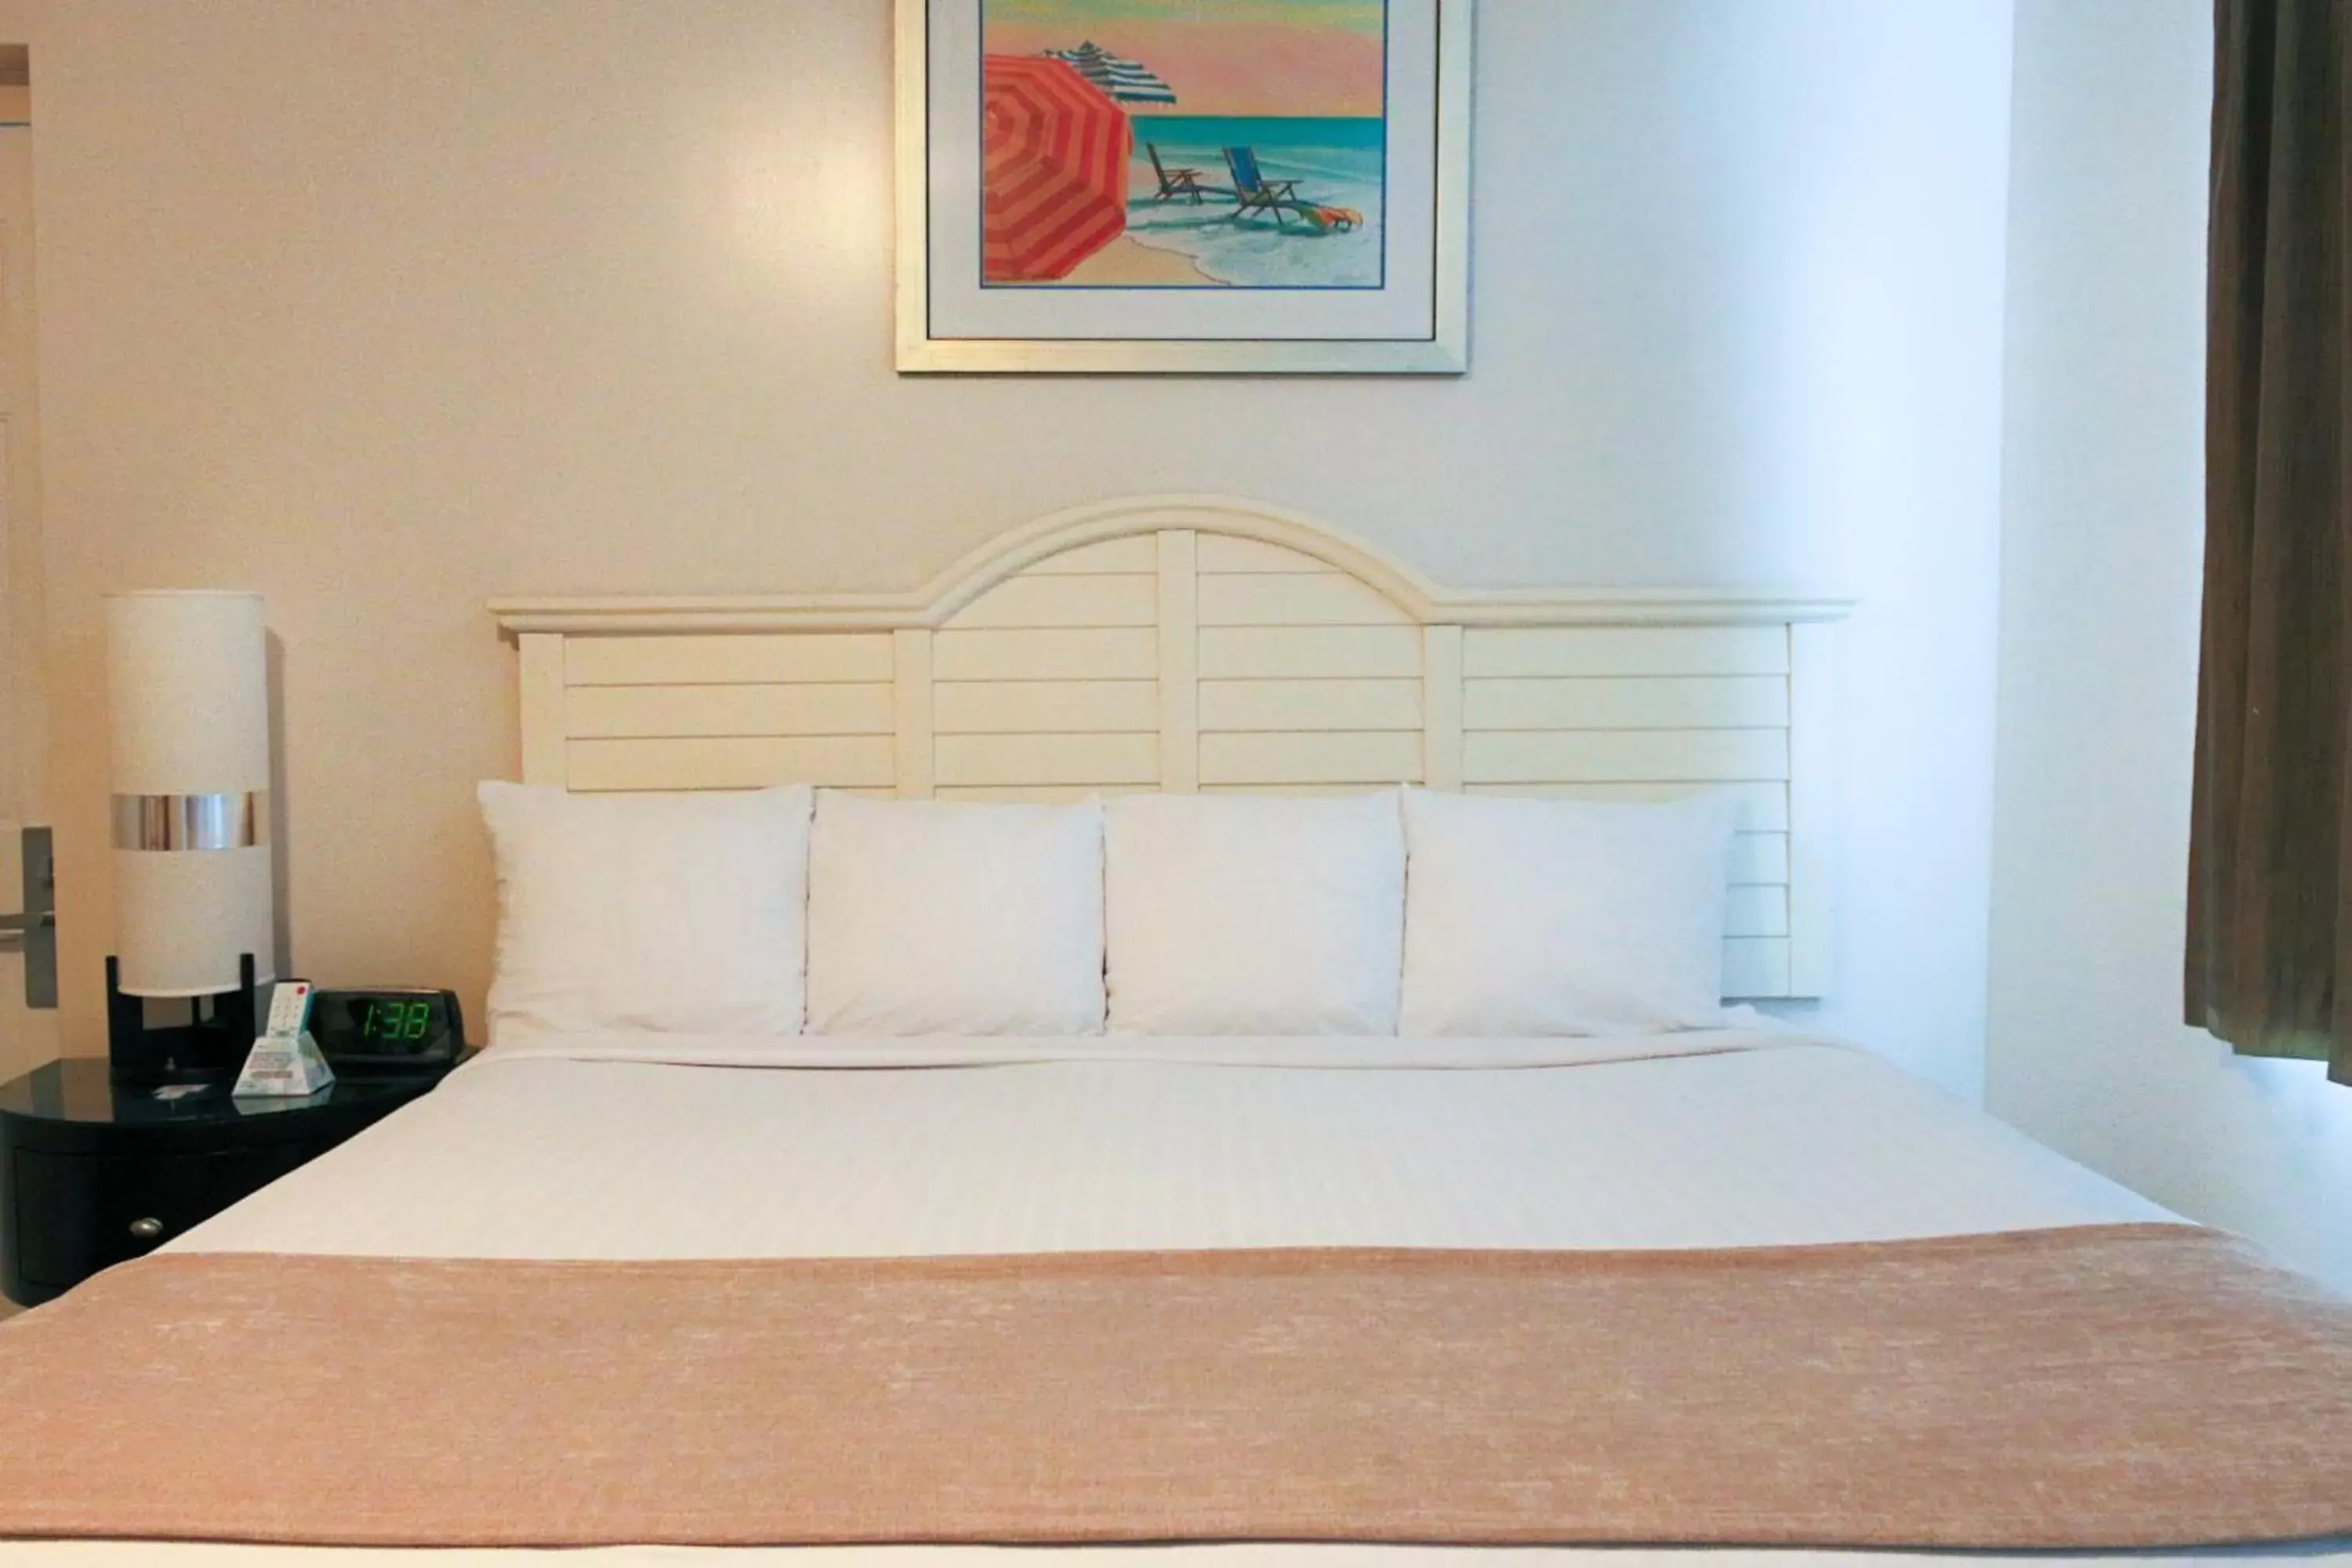 Bed in Beach Place Hotel